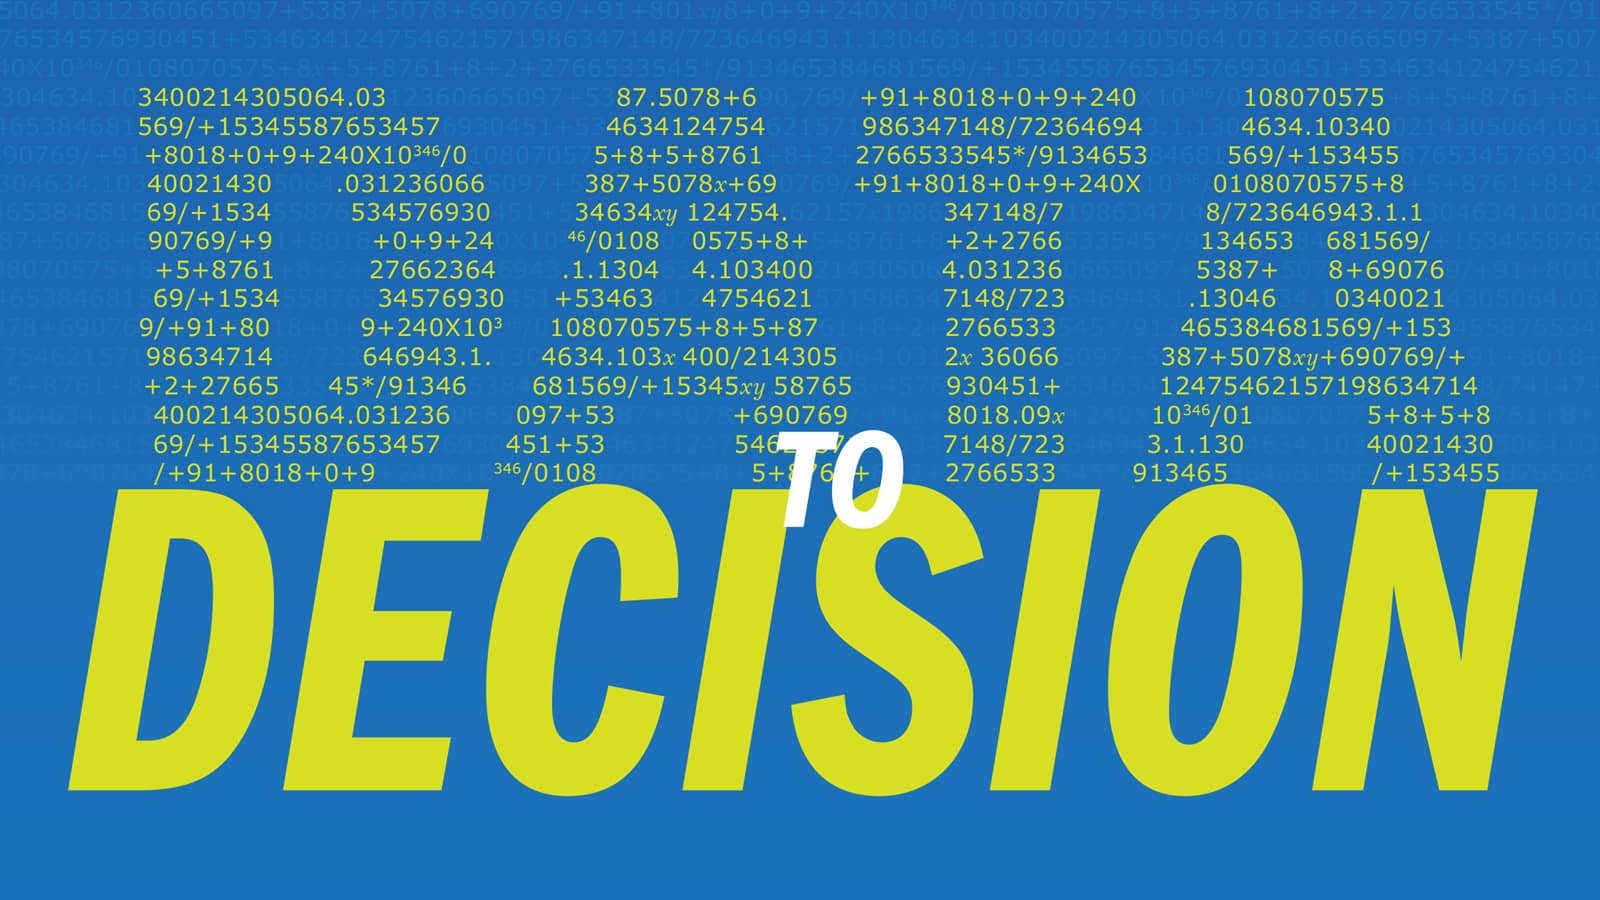 Cover image from E-Quad News, reading "From Data to Decision." The word "Data" is comprised of numerals and digits.